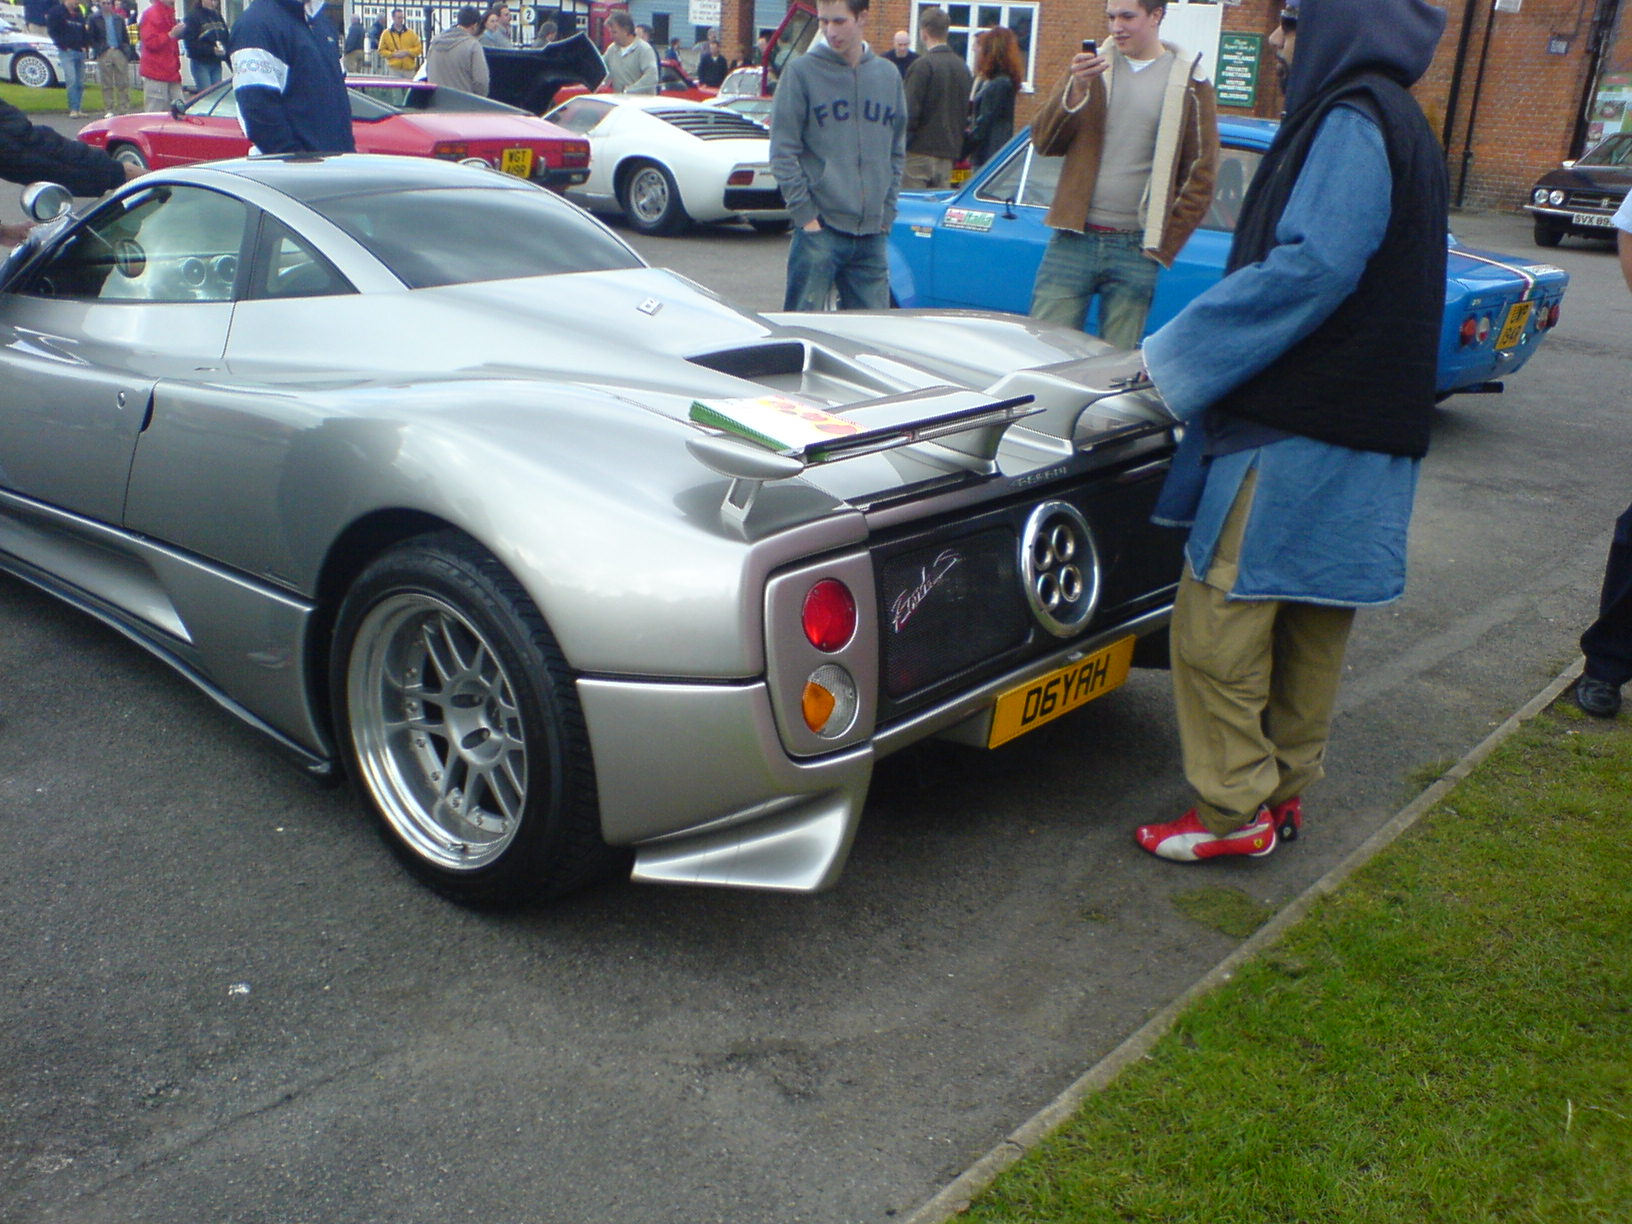 Zonda again, check out the exhausts